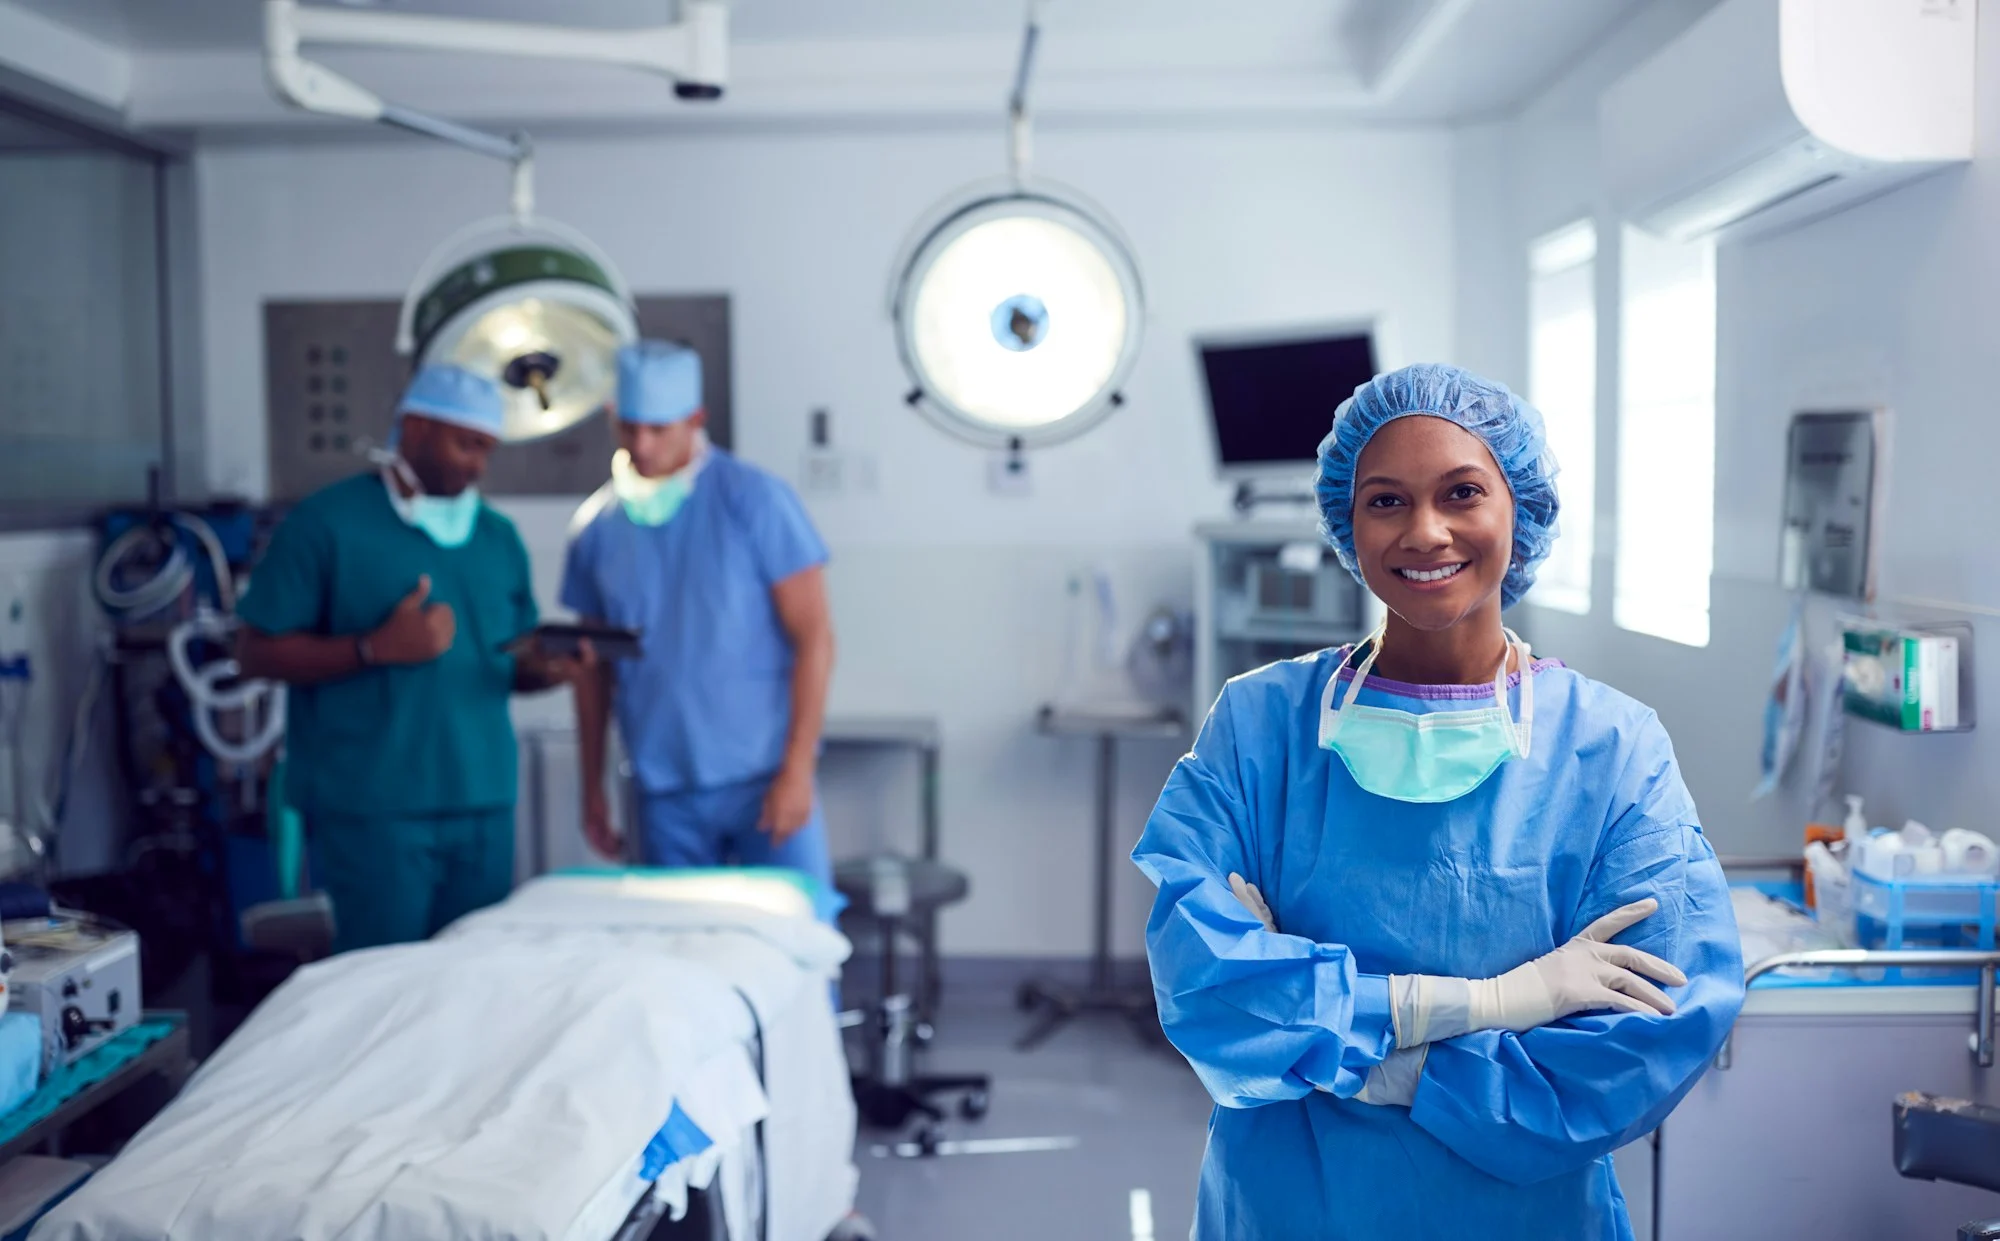 Portrait Of Female Surgeon Wearing Scrubs And Protective Glasses In Hospital Operating Theater